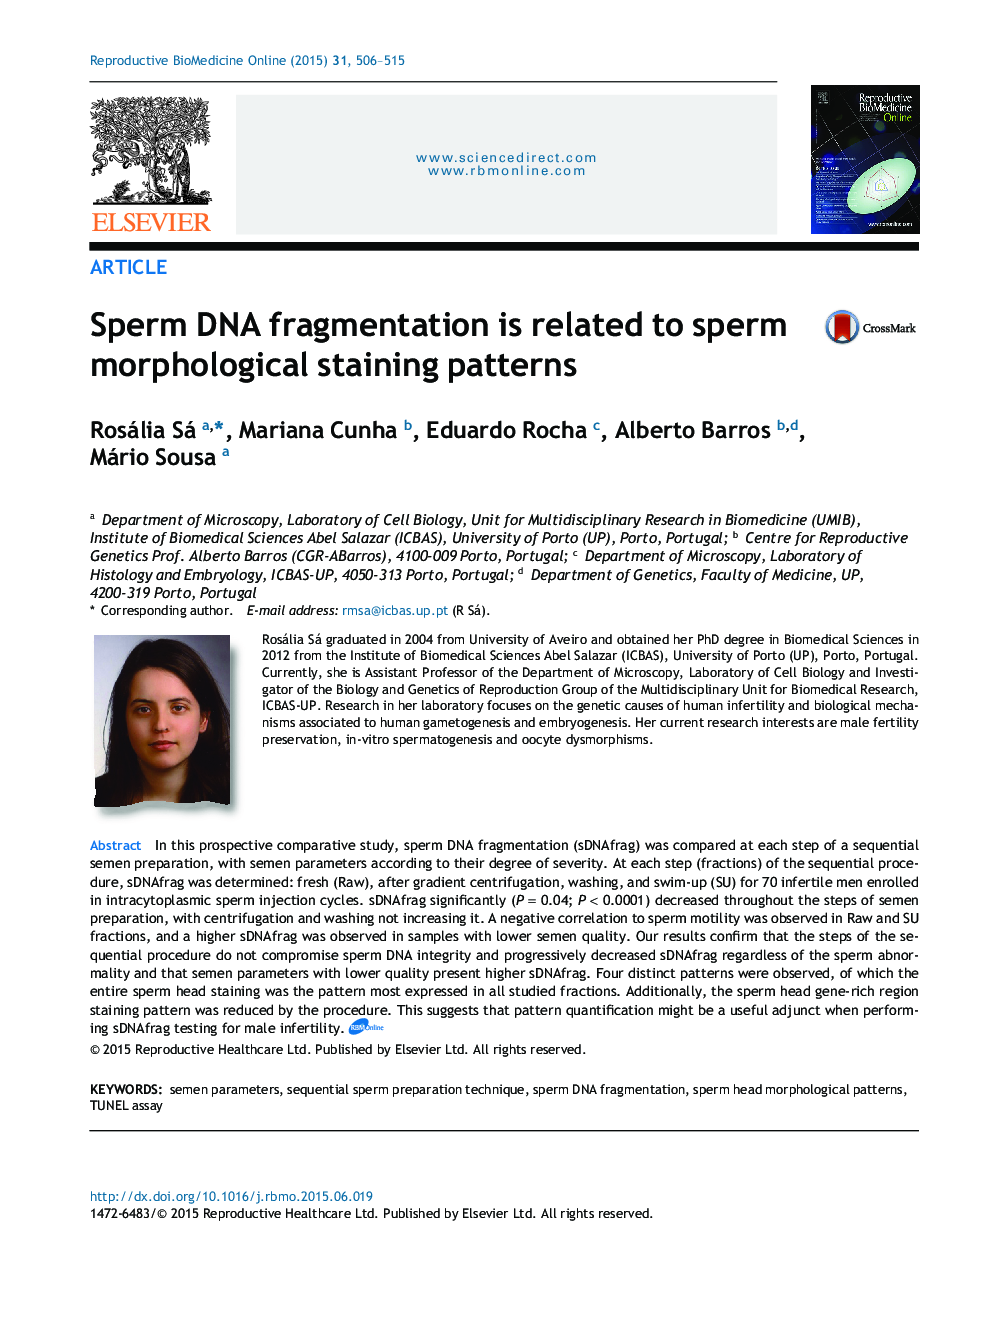 Sperm DNA fragmentation is related to sperm morphological staining patterns